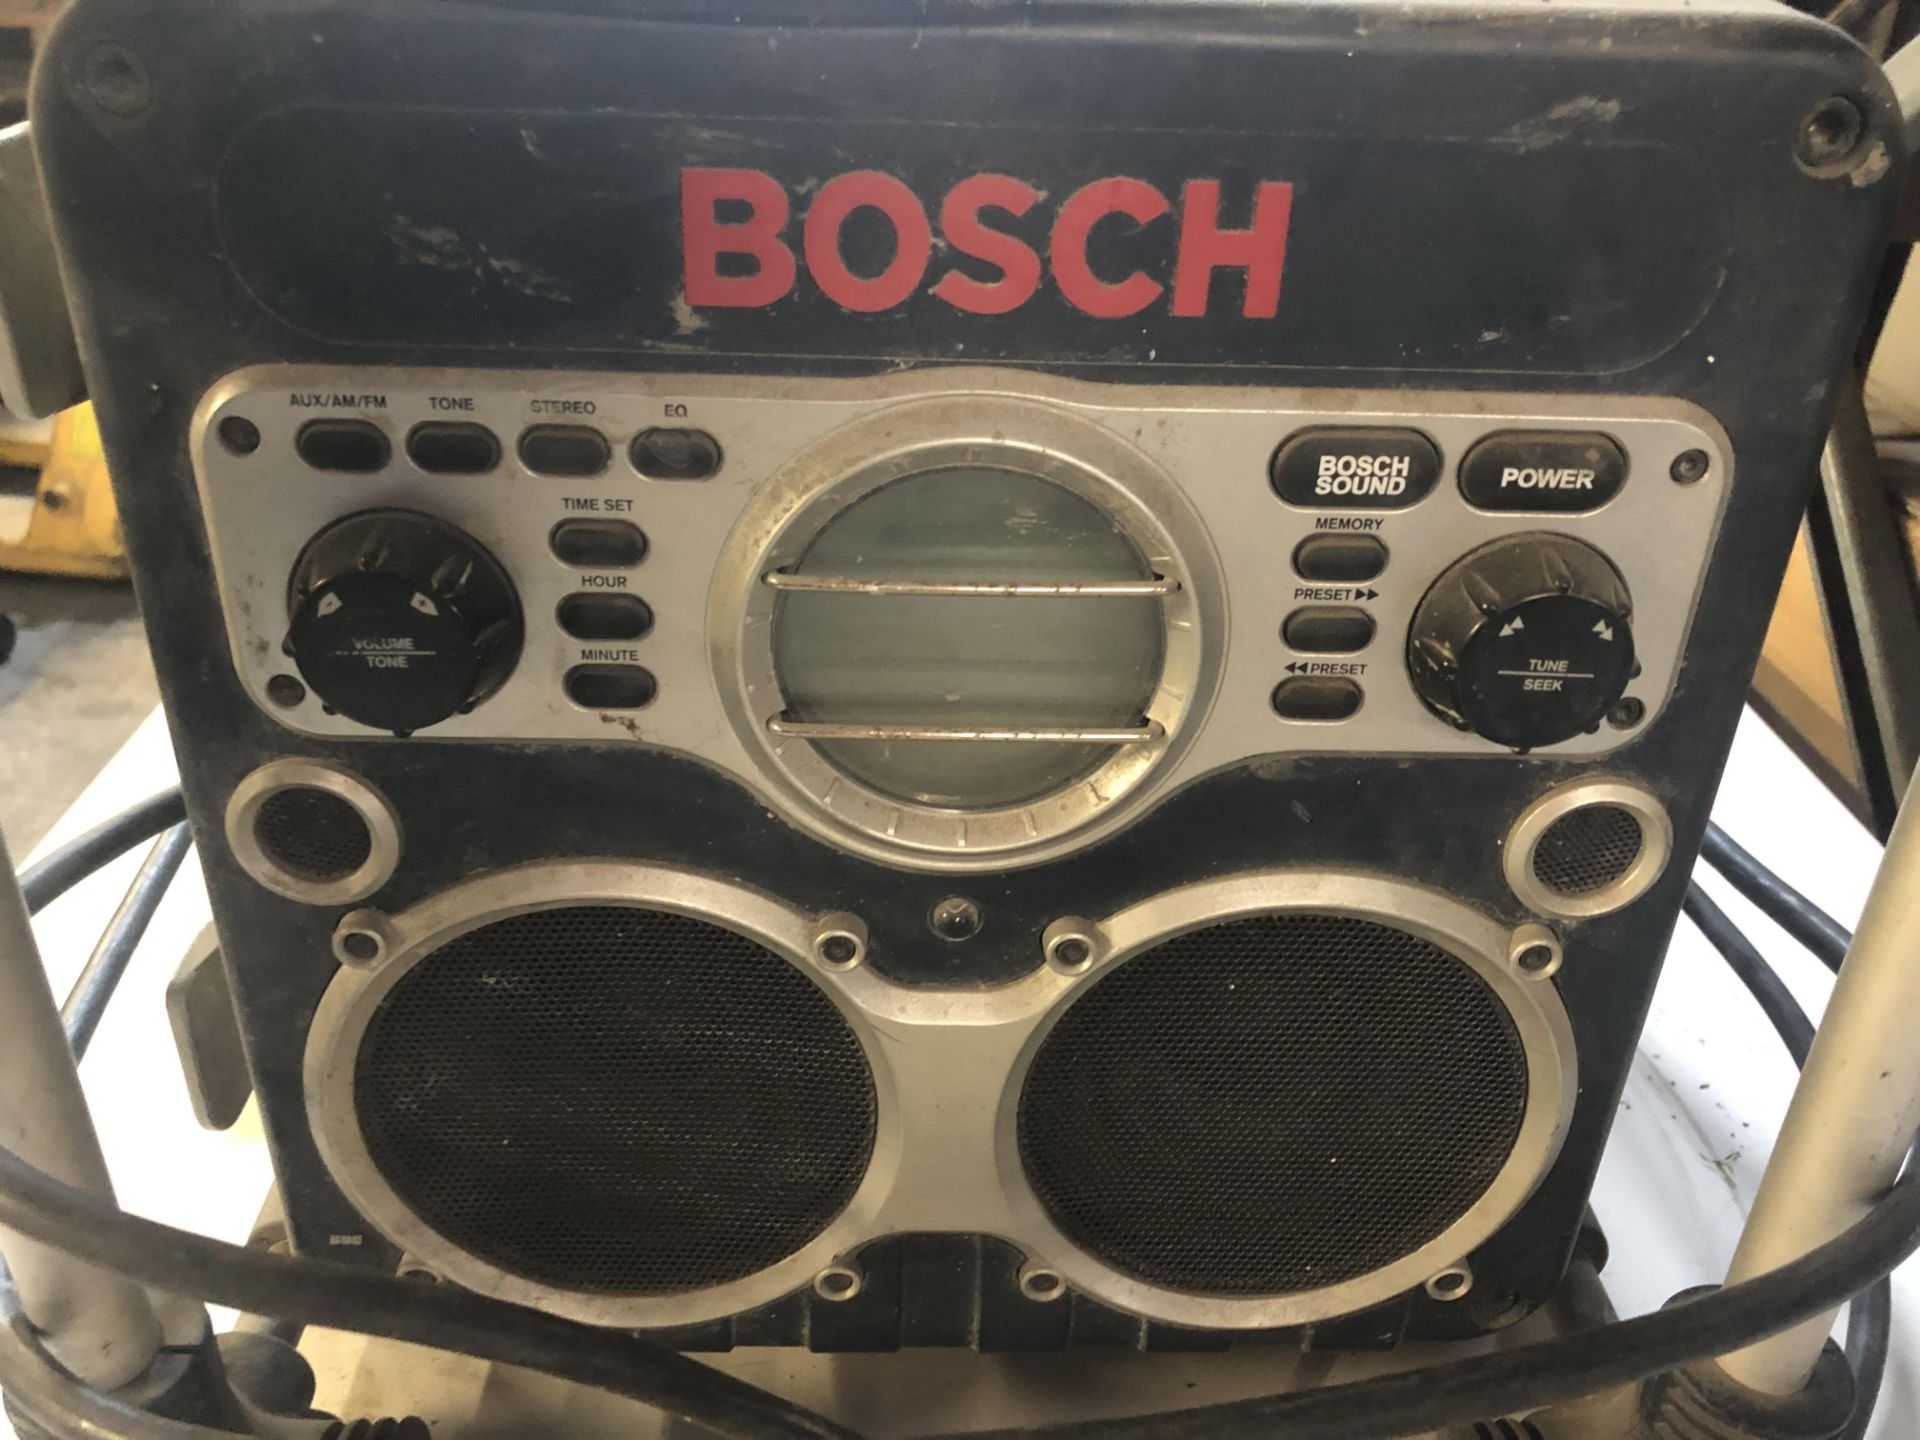 Bosch GML24V Professional Powerbox Radio/Charger - Image 4 of 4